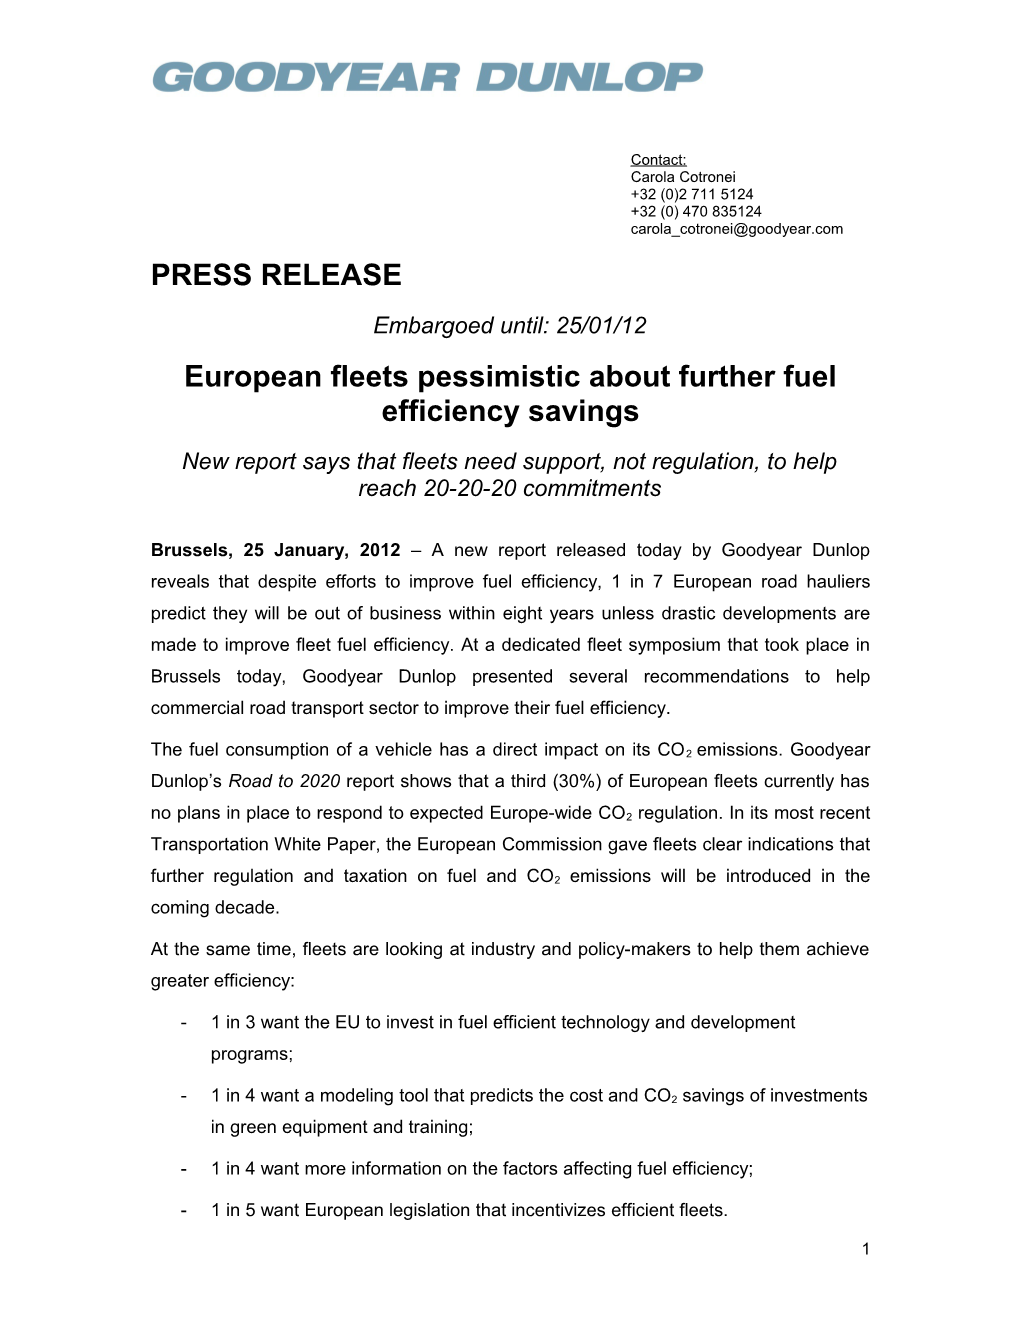 European Fleets Pessimistic About Further Fuel Efficiency Savings